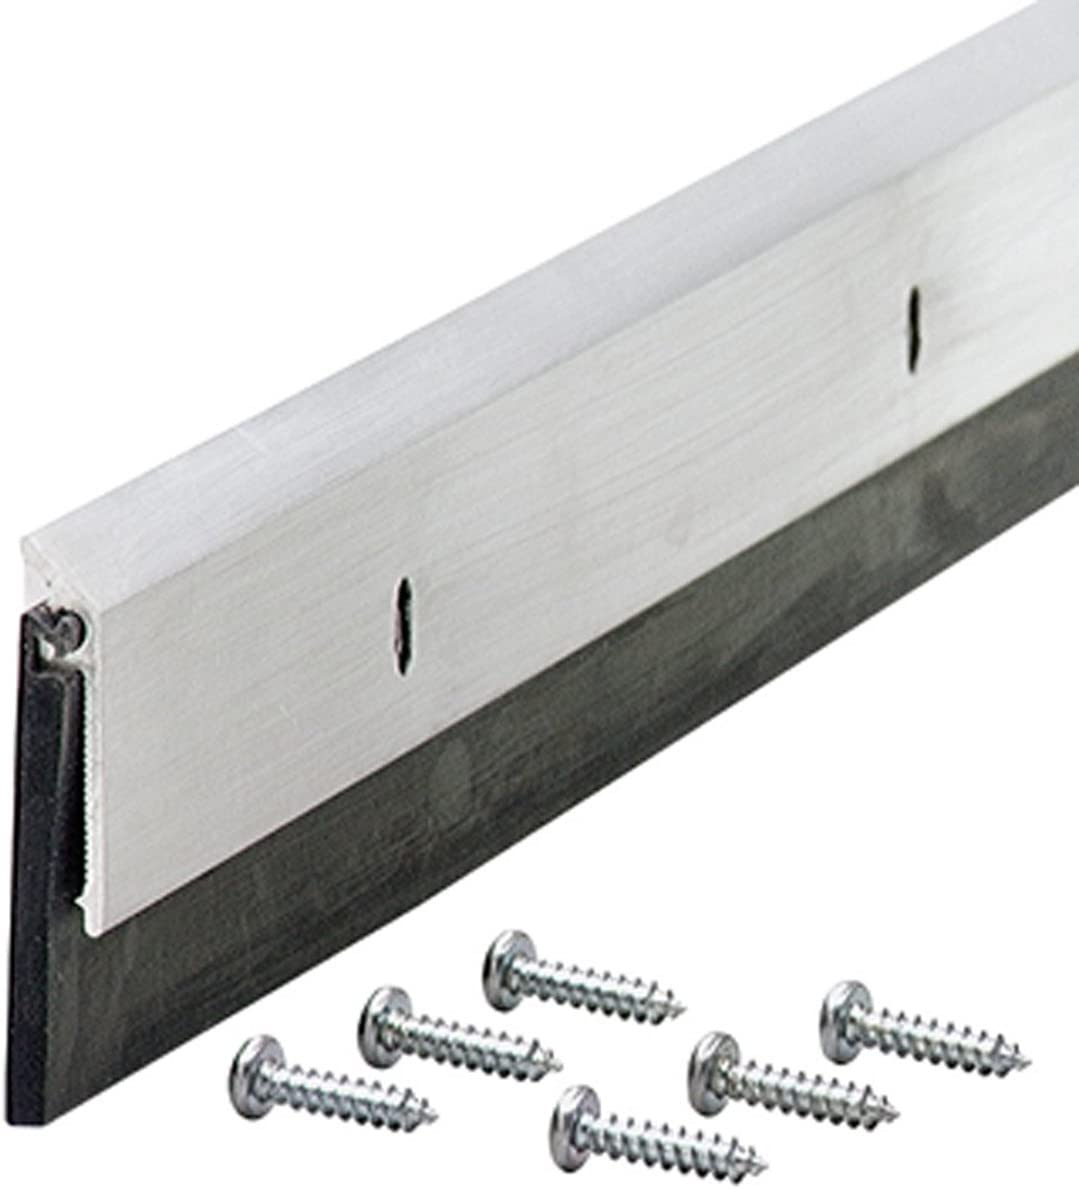 1/4" x 36" M-D Building Products Commercial Grade Door Sweep (Silver) $11.52